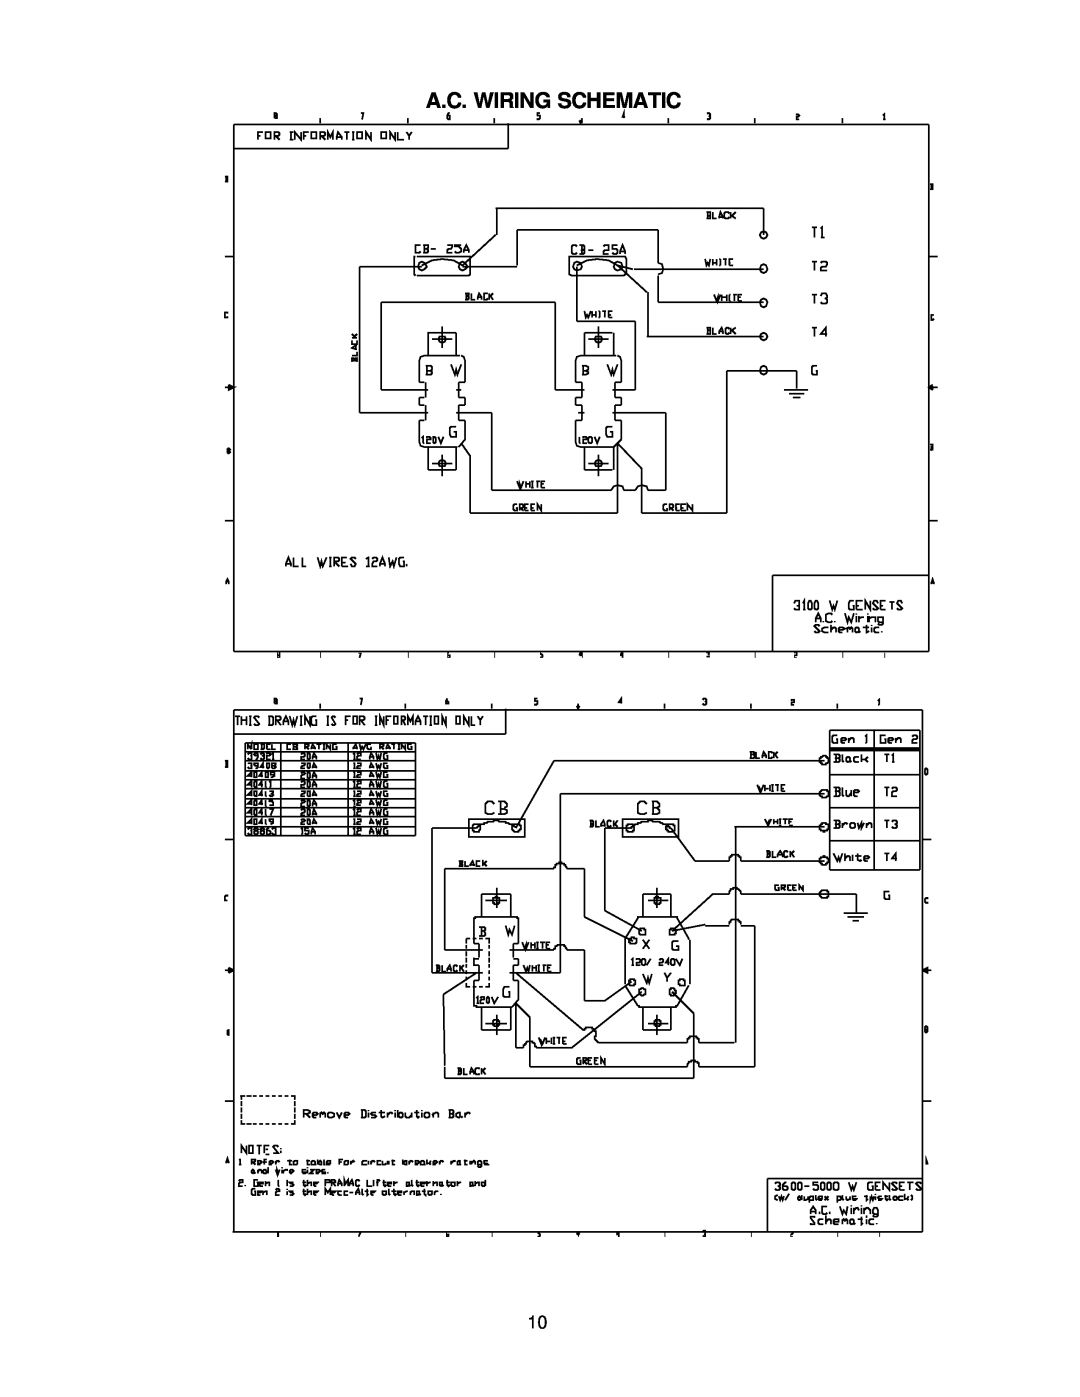 Chicago Electric 38863, 38862, 39408, 39321 user manual A.C. Wiring Schematic 